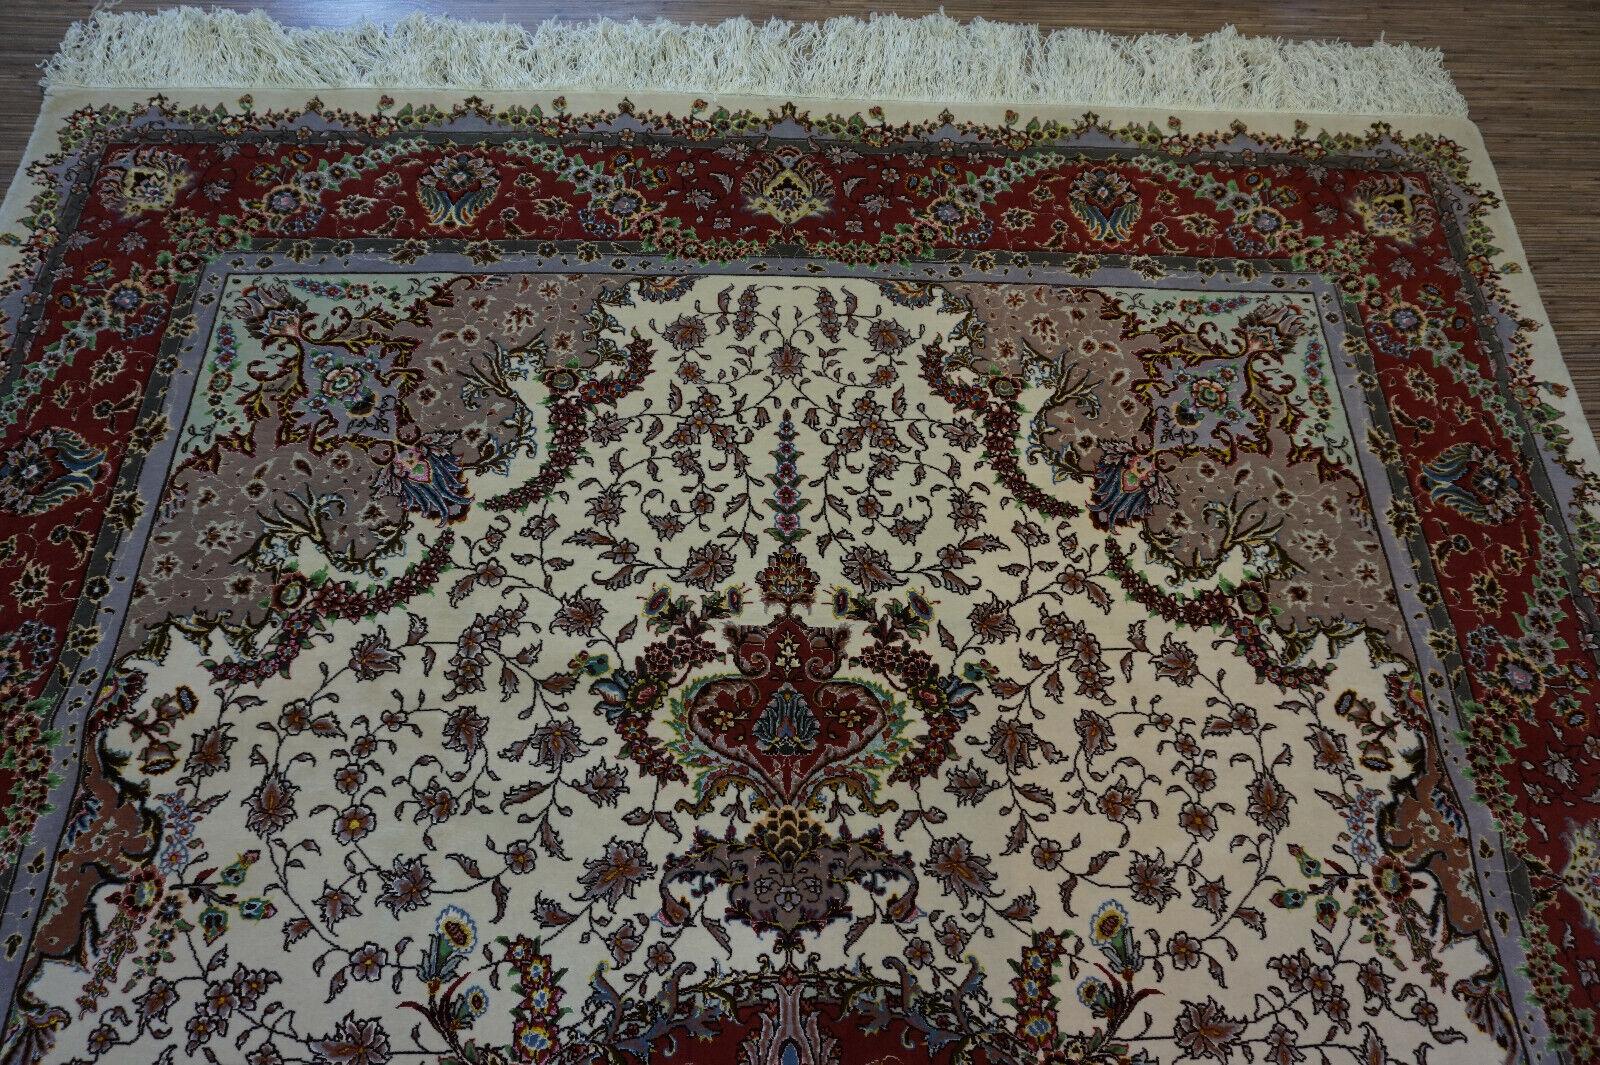 Wool Handmade Vintage Persian Style Tabriz Rug With Silk 6.5' x 10', 1980s - 1D63 For Sale